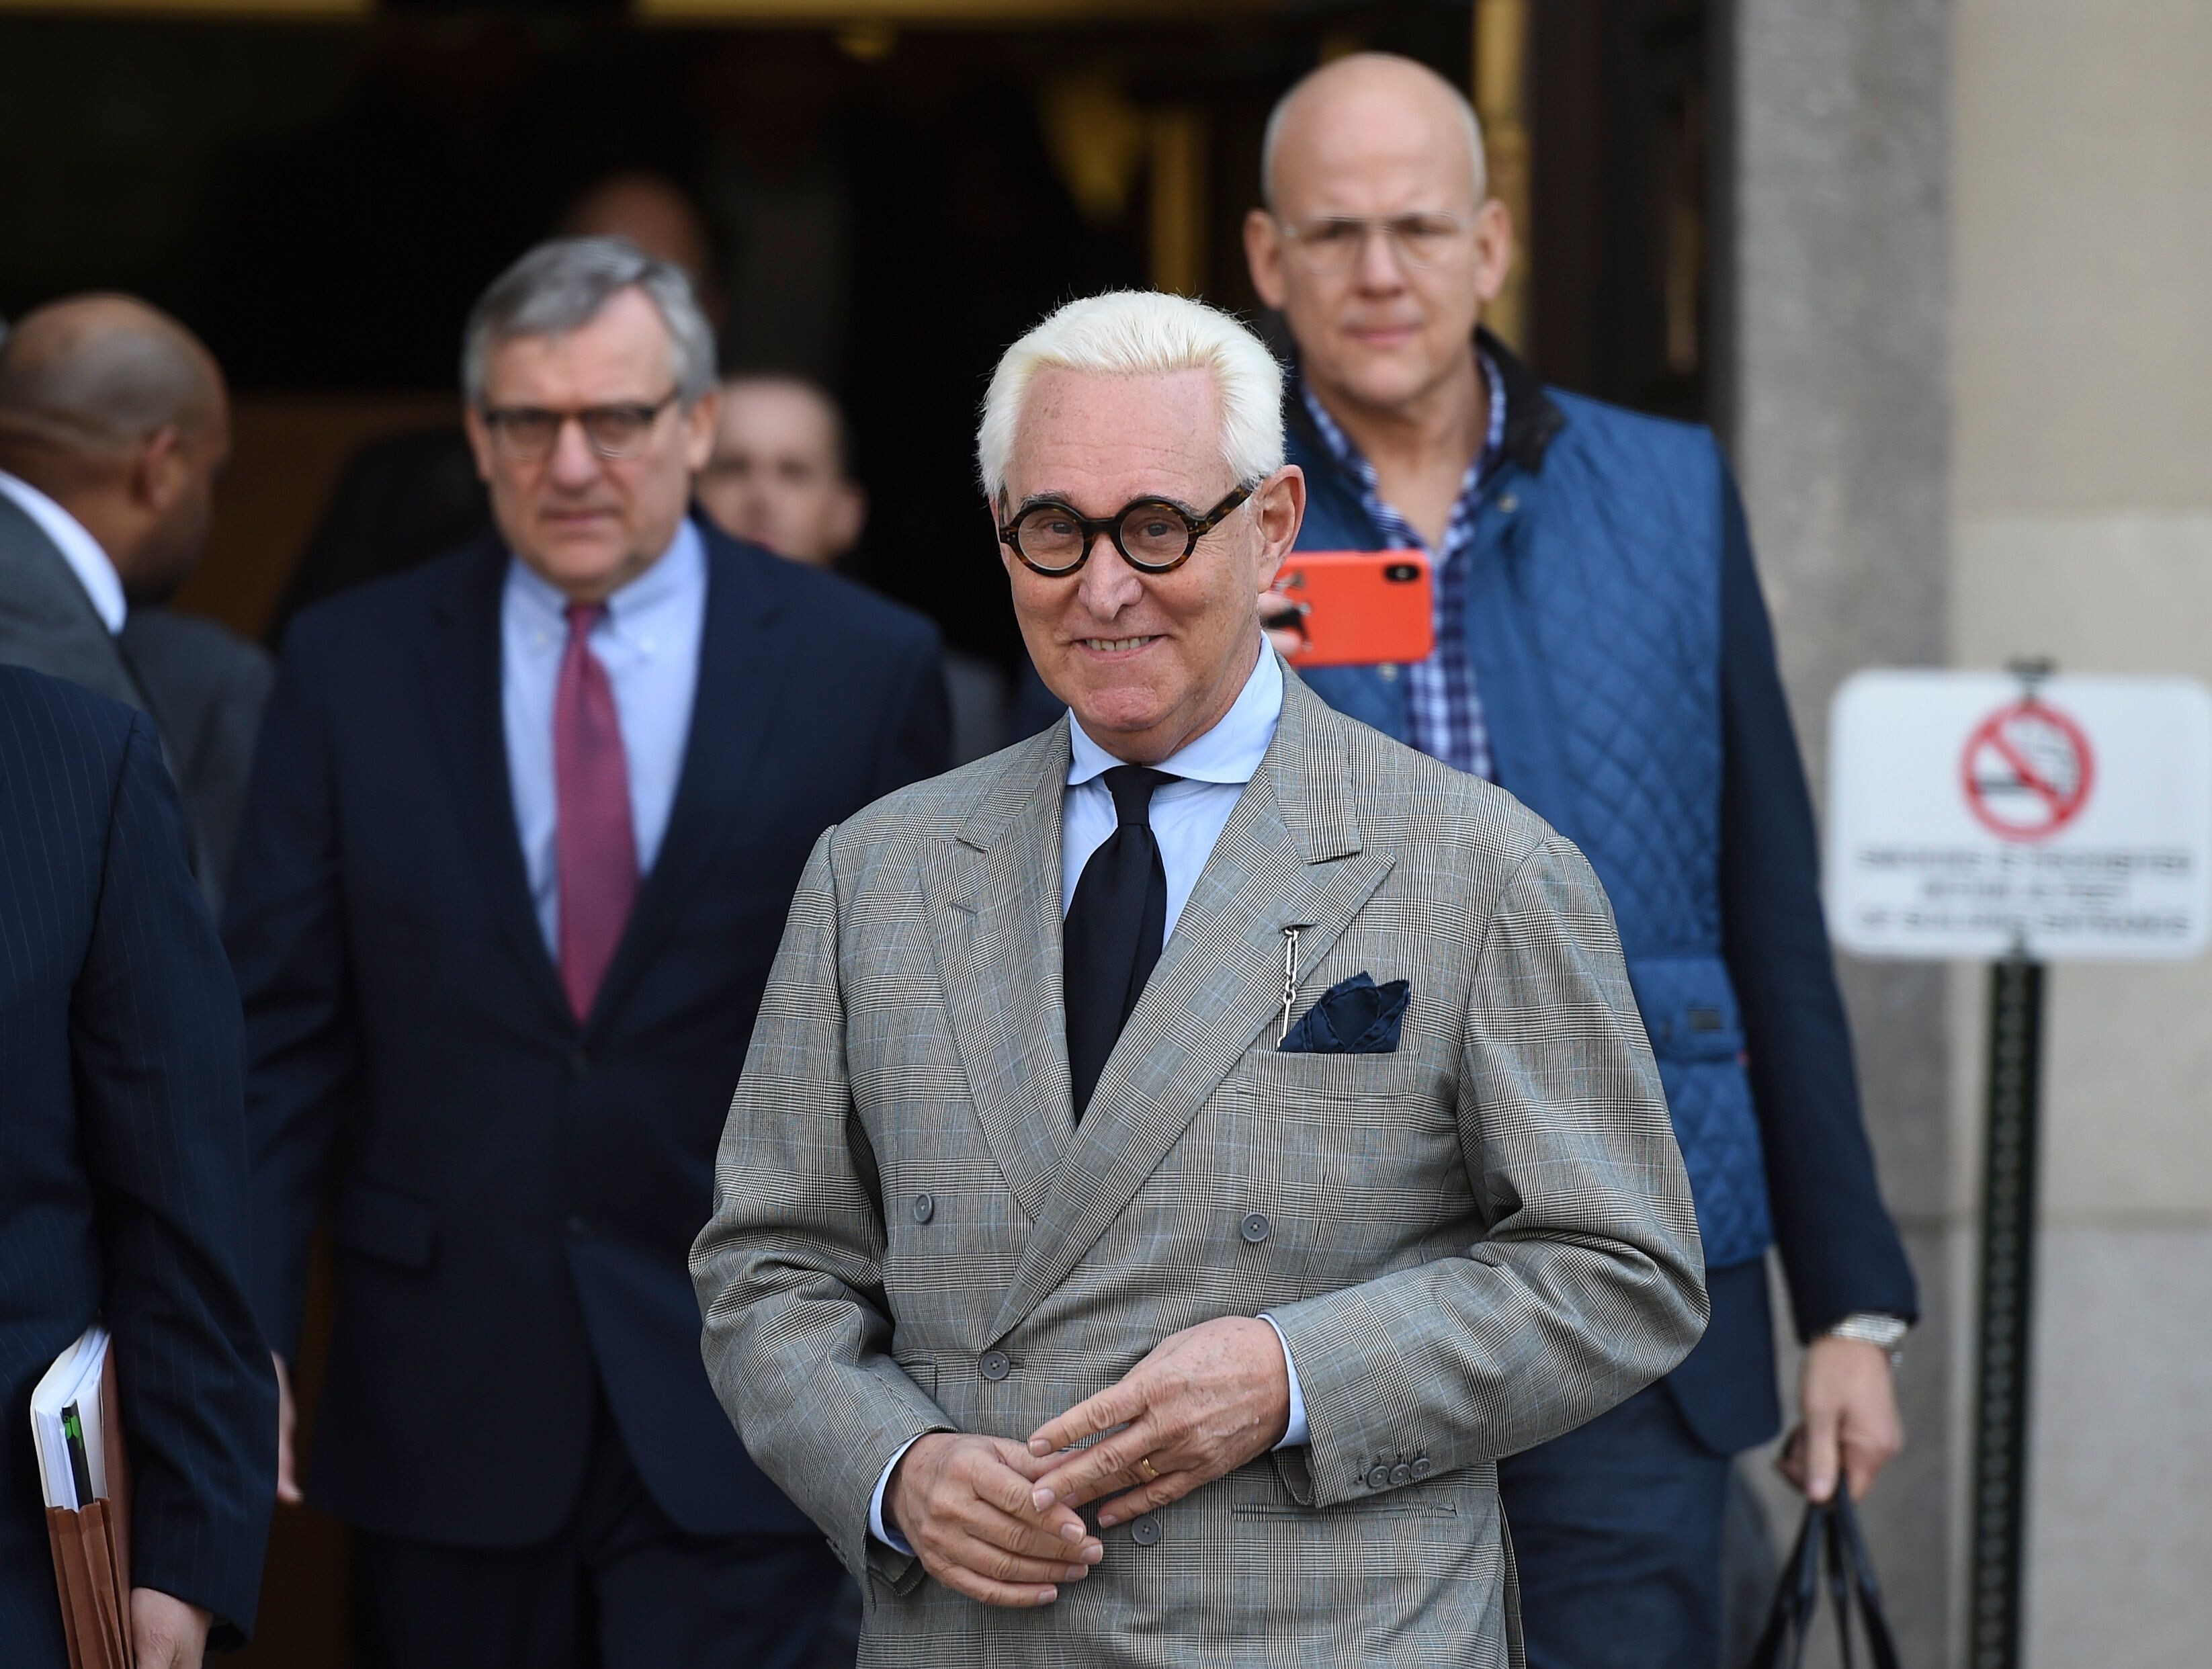 Roger Stone, a former adviser to US President Donald Trump, leaves a court hearing in Washington last year. Photo: AFP